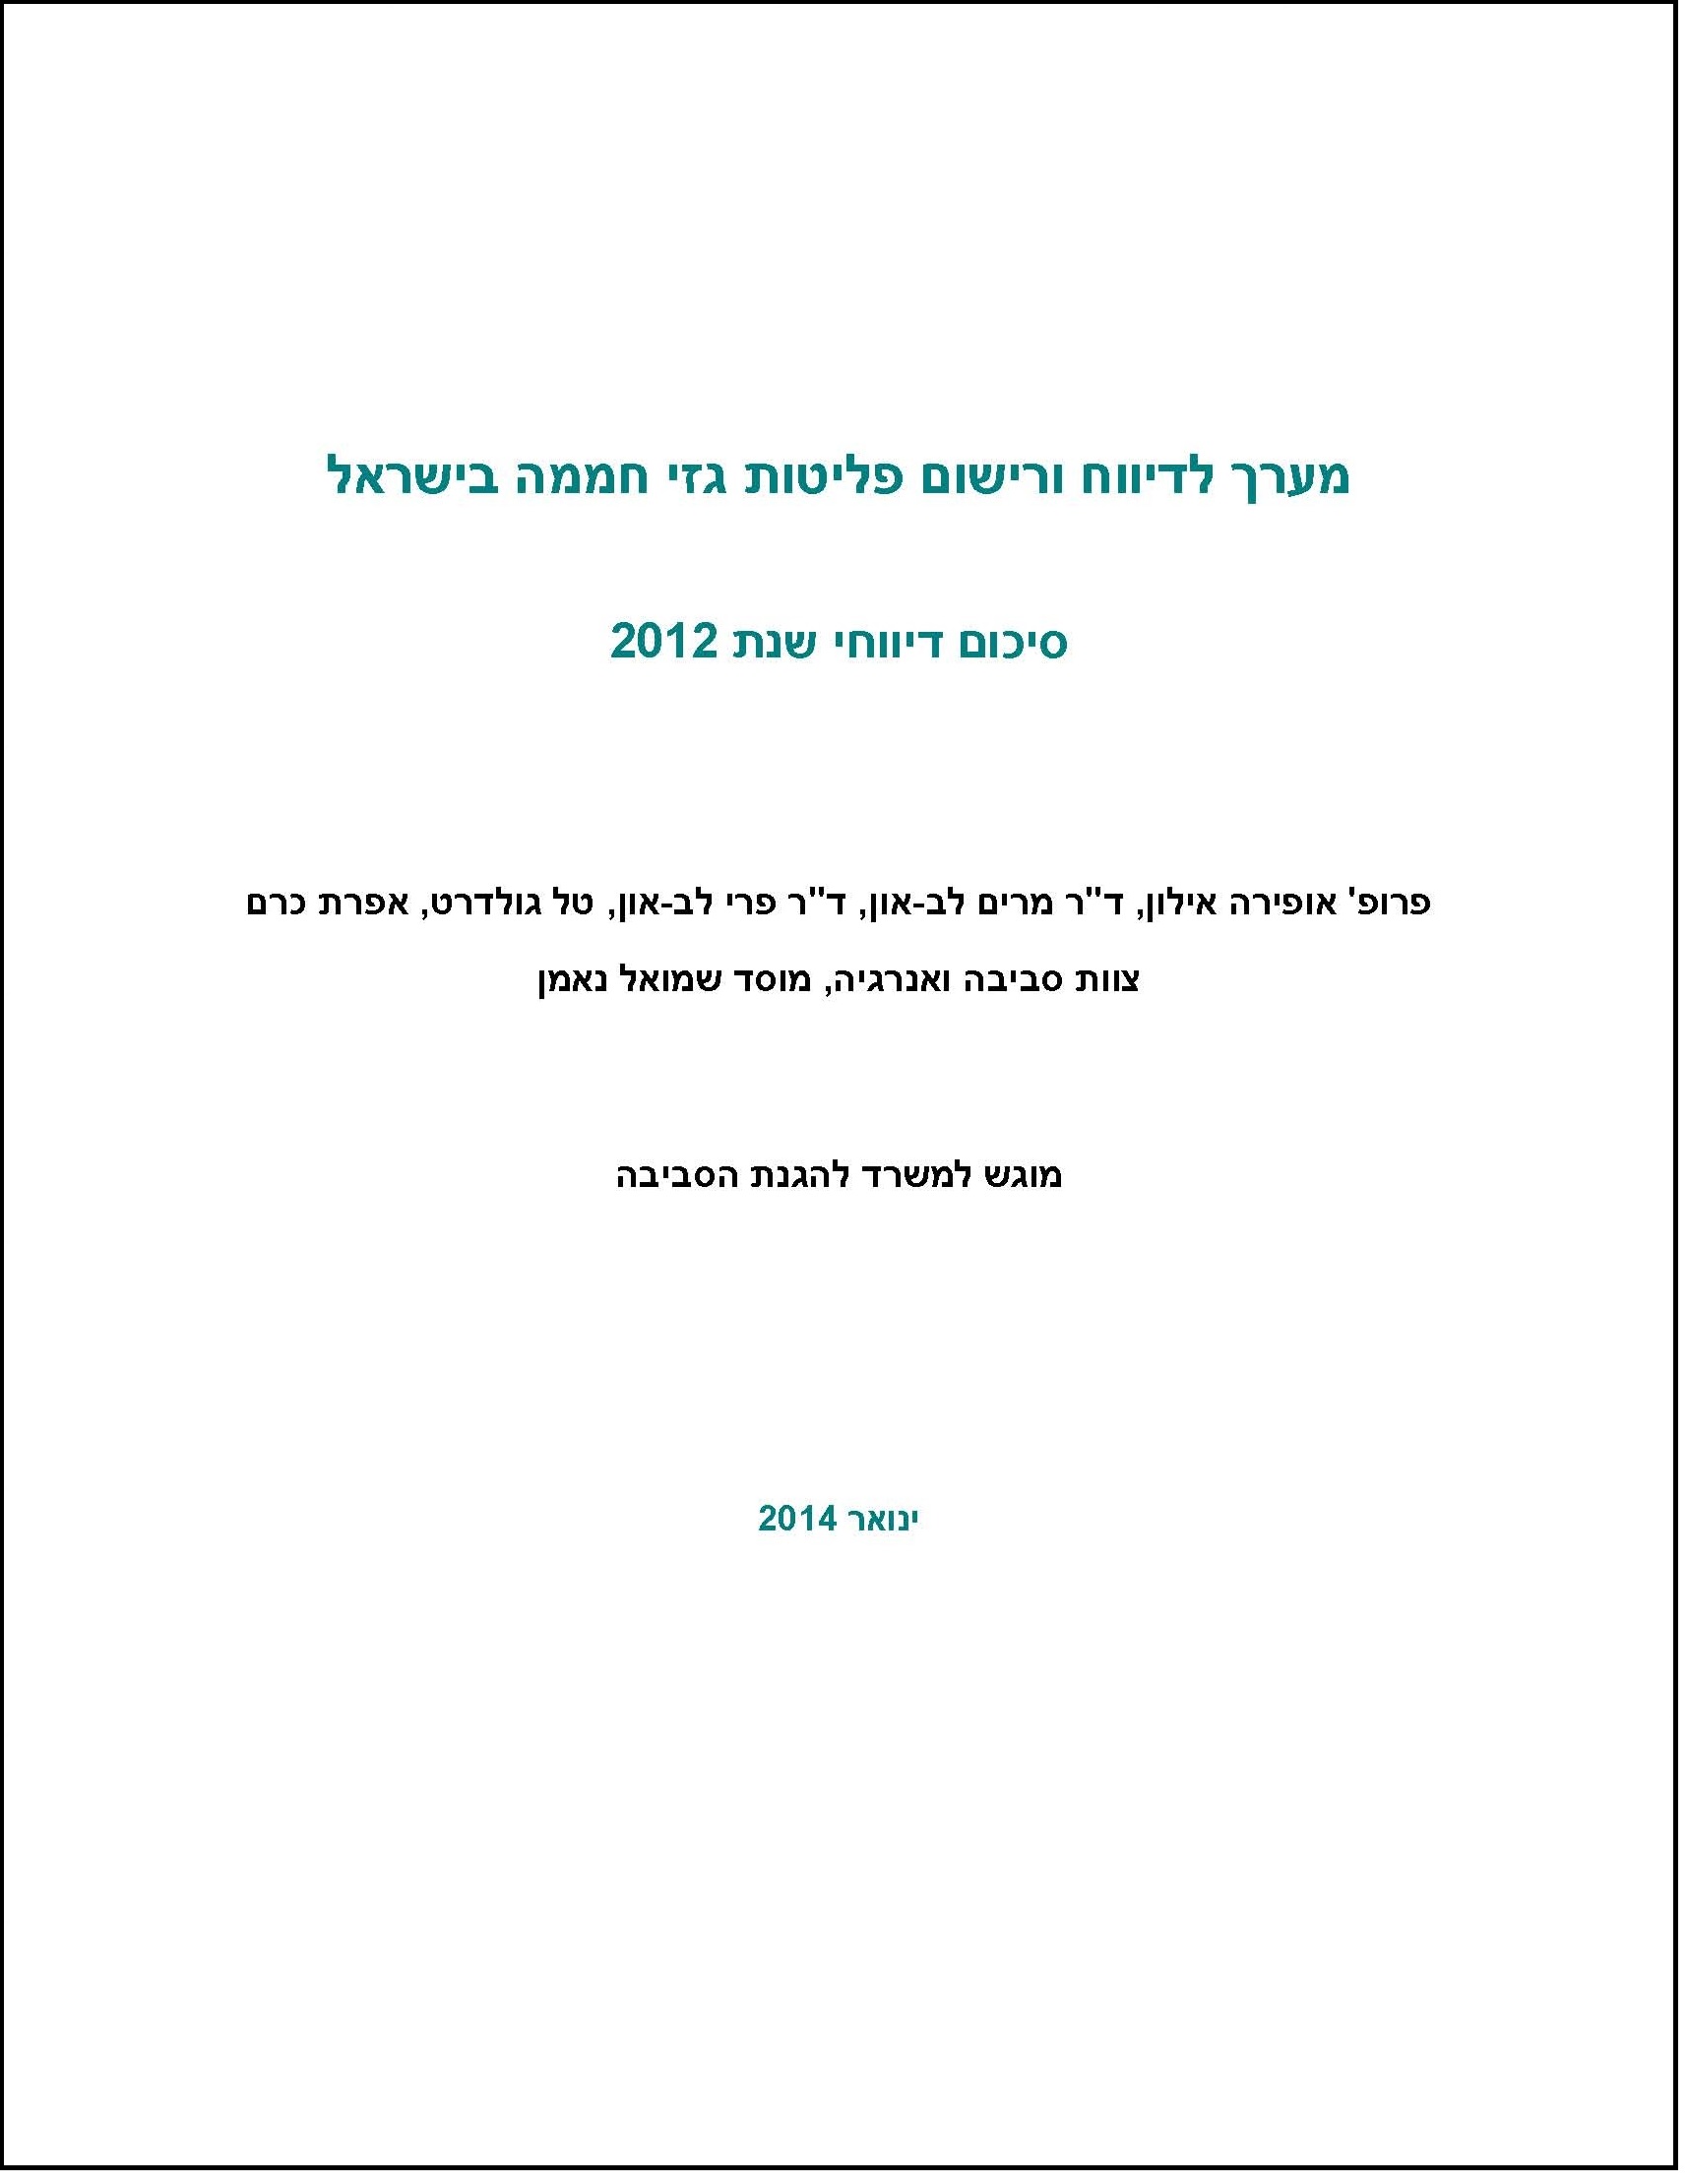 Greenhouse Gas Emissions Reporting and Registration System in Israel: Summary of Reports for 2012